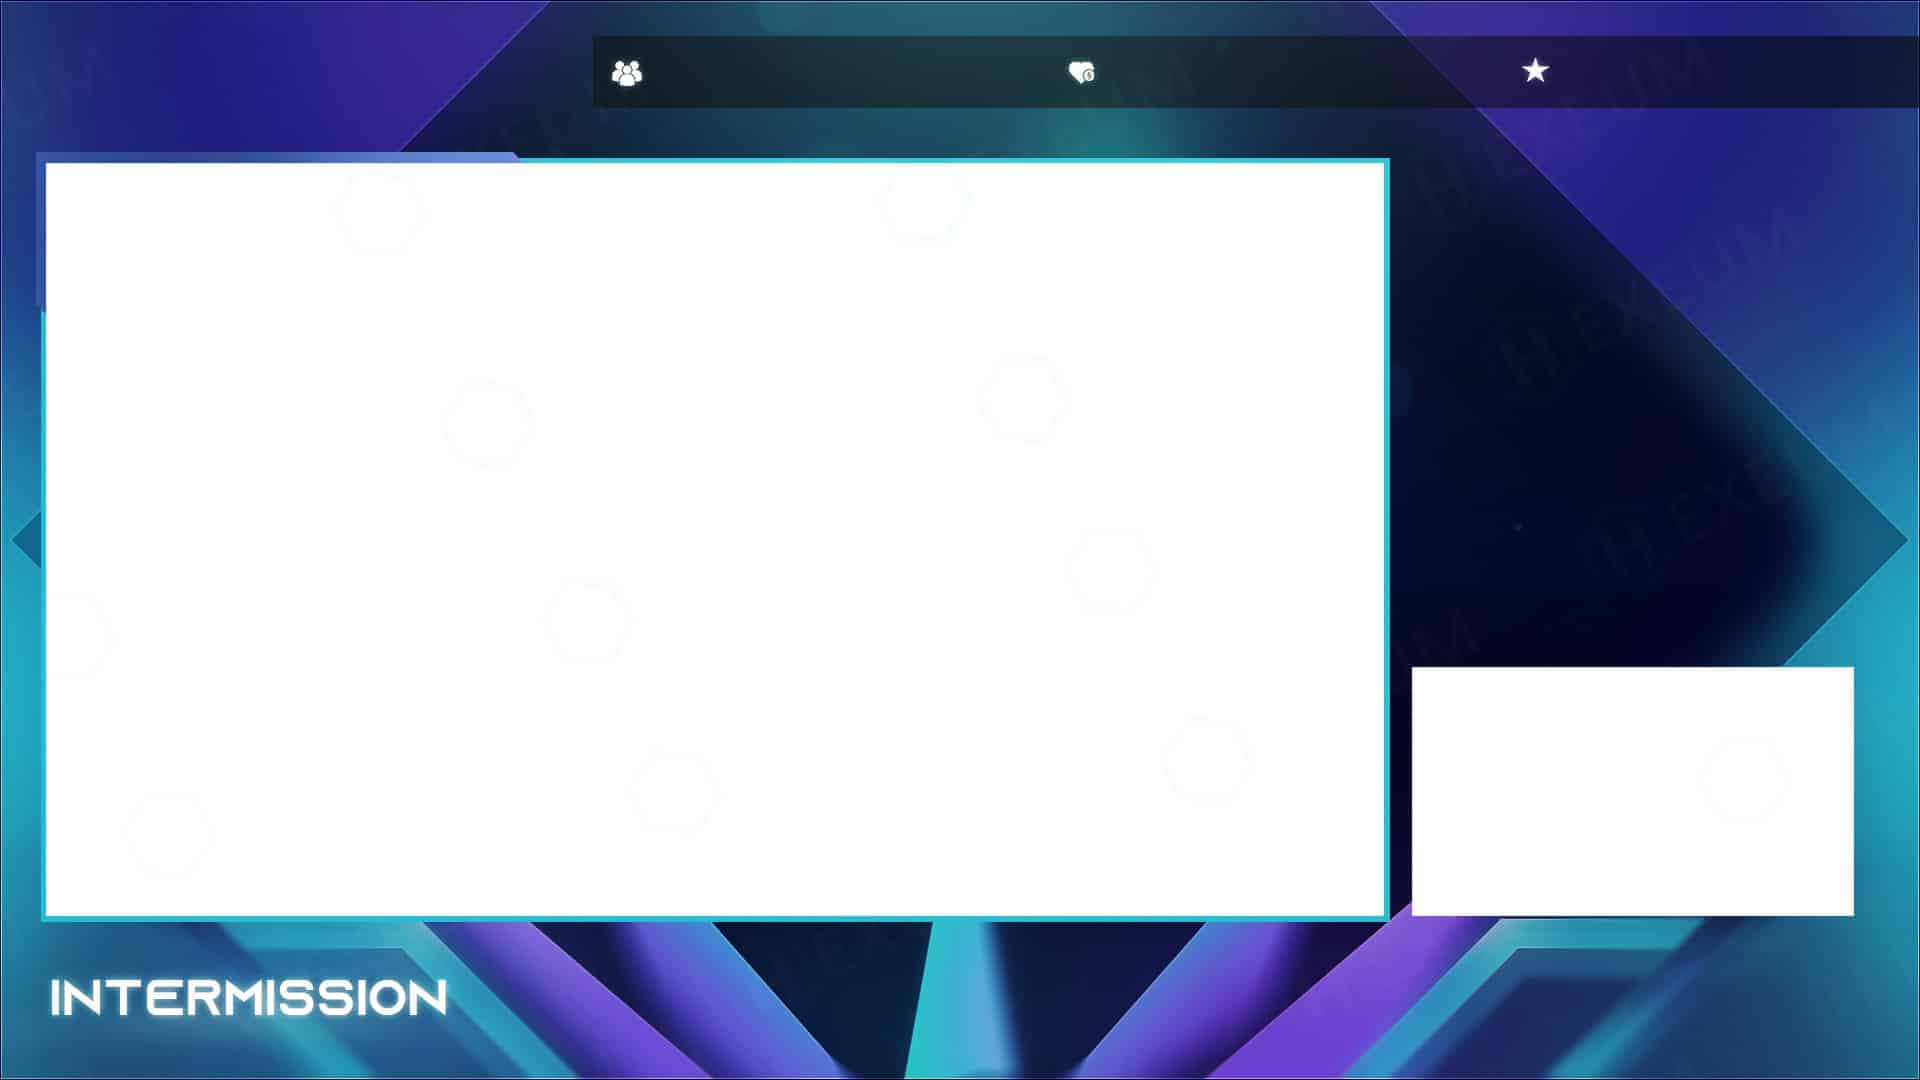 twitch intermission screen template